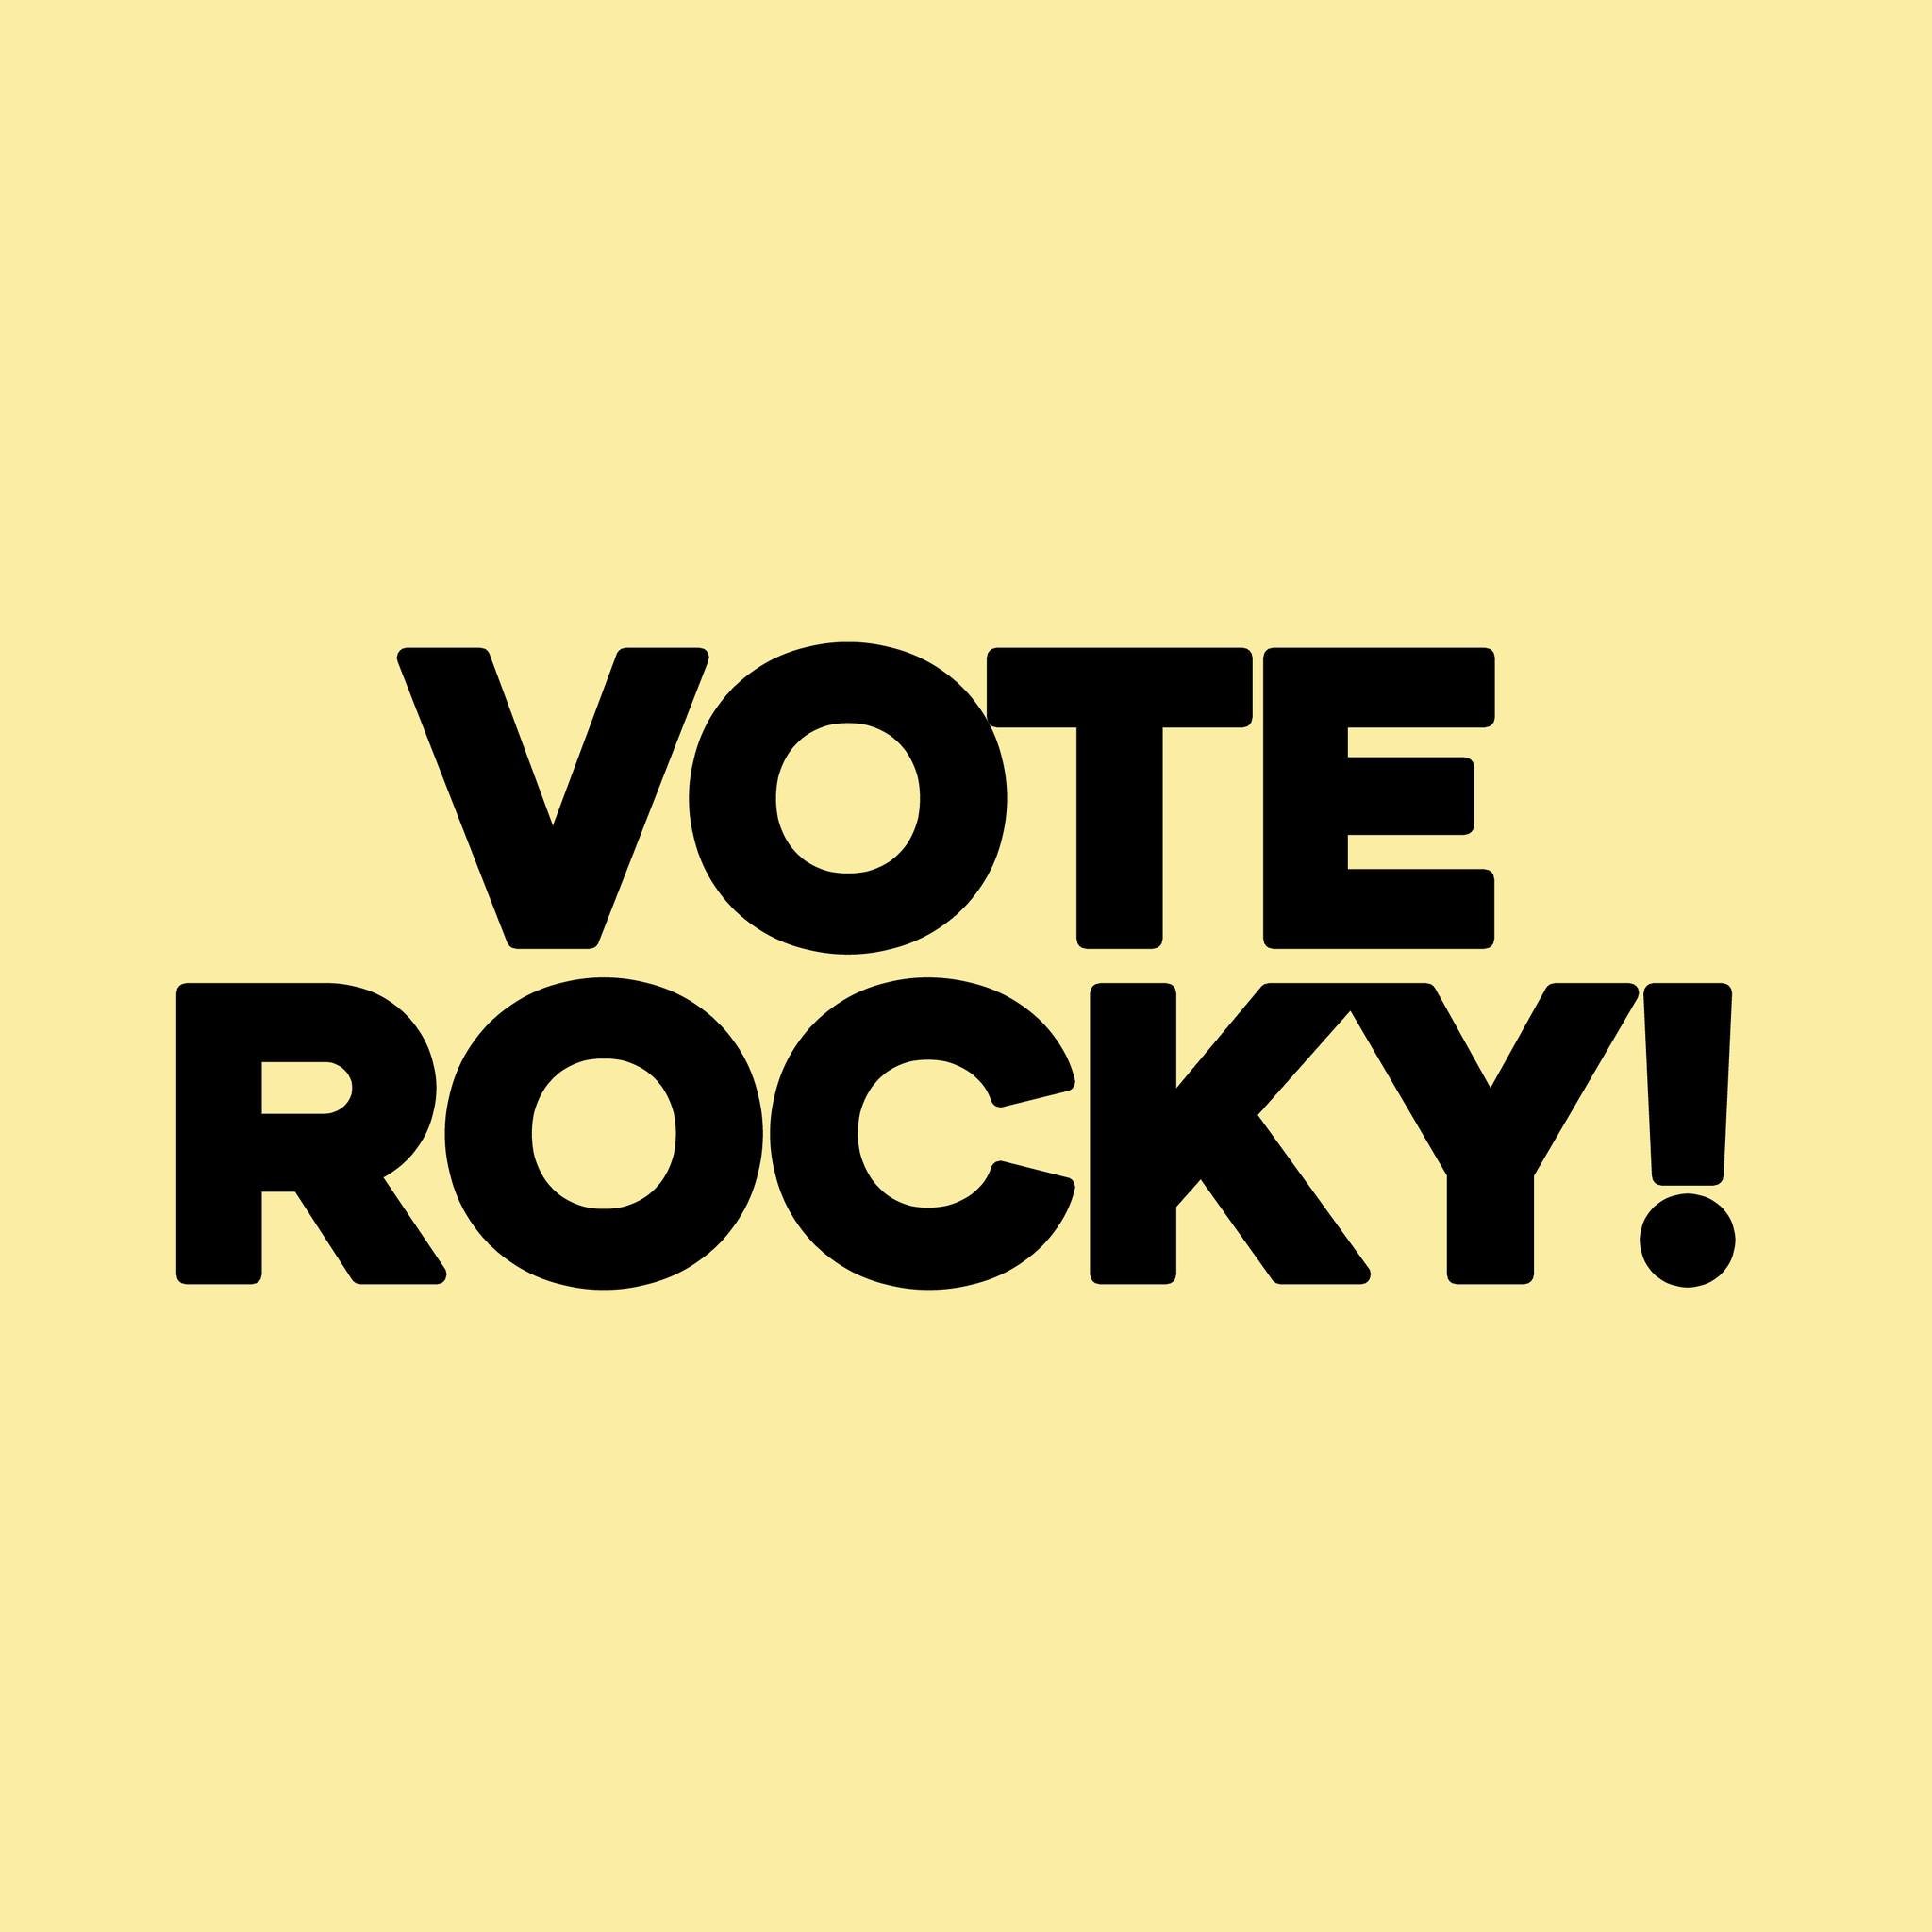 Vote ROCKY! 🇦🇺

Rocky has been named a finalist in 'Queensland's Top Tourism Town' Awards! Let's show our support and get behind our beloved town! 

https://pulse.ly/dvamb1bycq

#ForRockhampton #ForOurCity